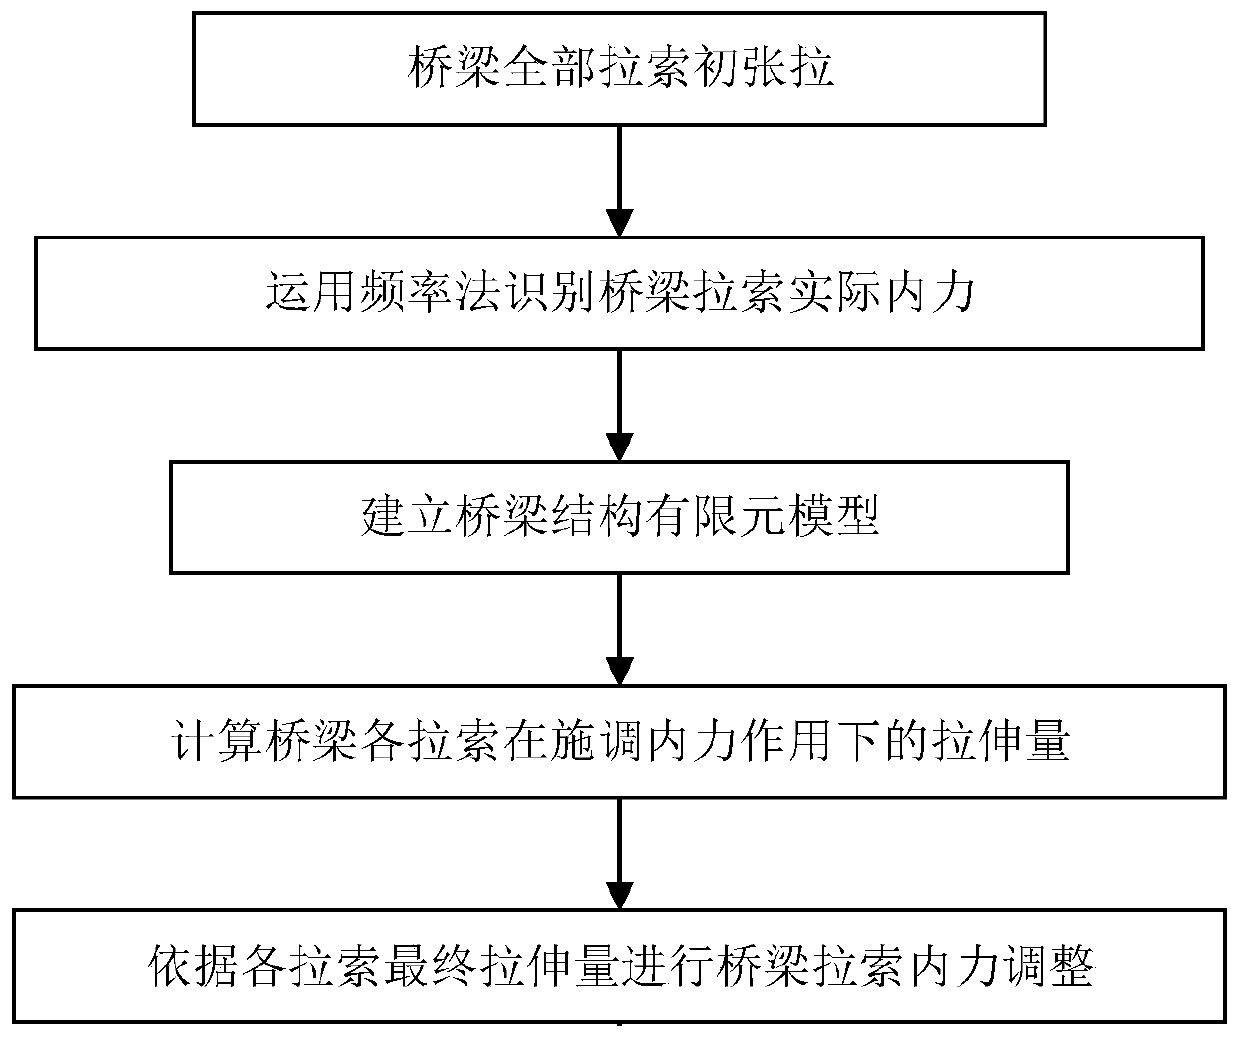 Adjustment Method of Cable Internal Force of Bridge with Continuous Deck Structure